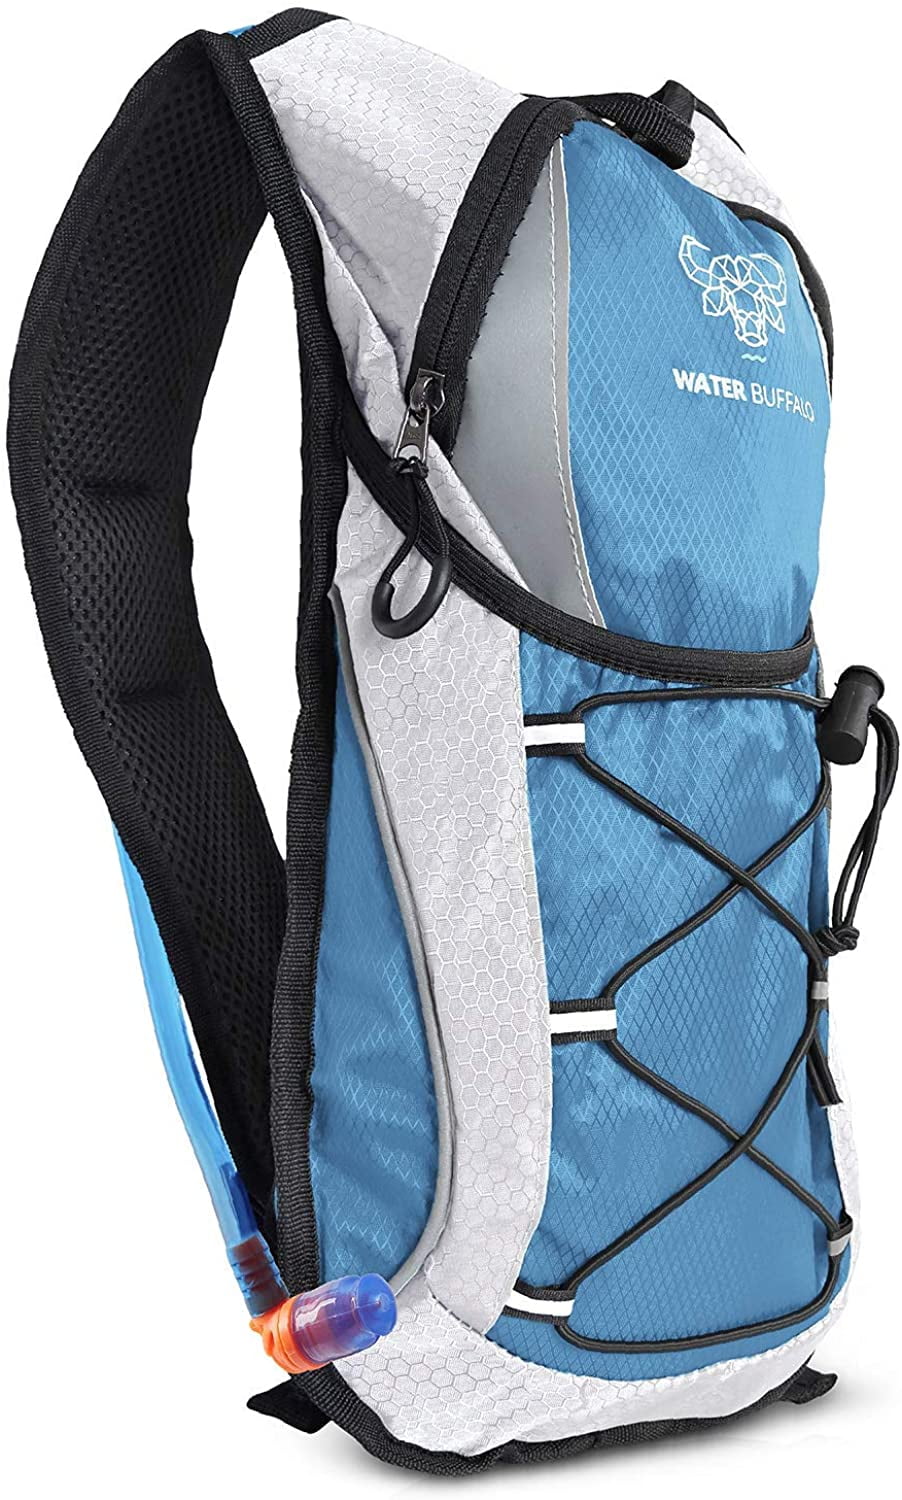 Water Backpack 2L Water Bladder Water Buffalo Hydration Pack Backpack 